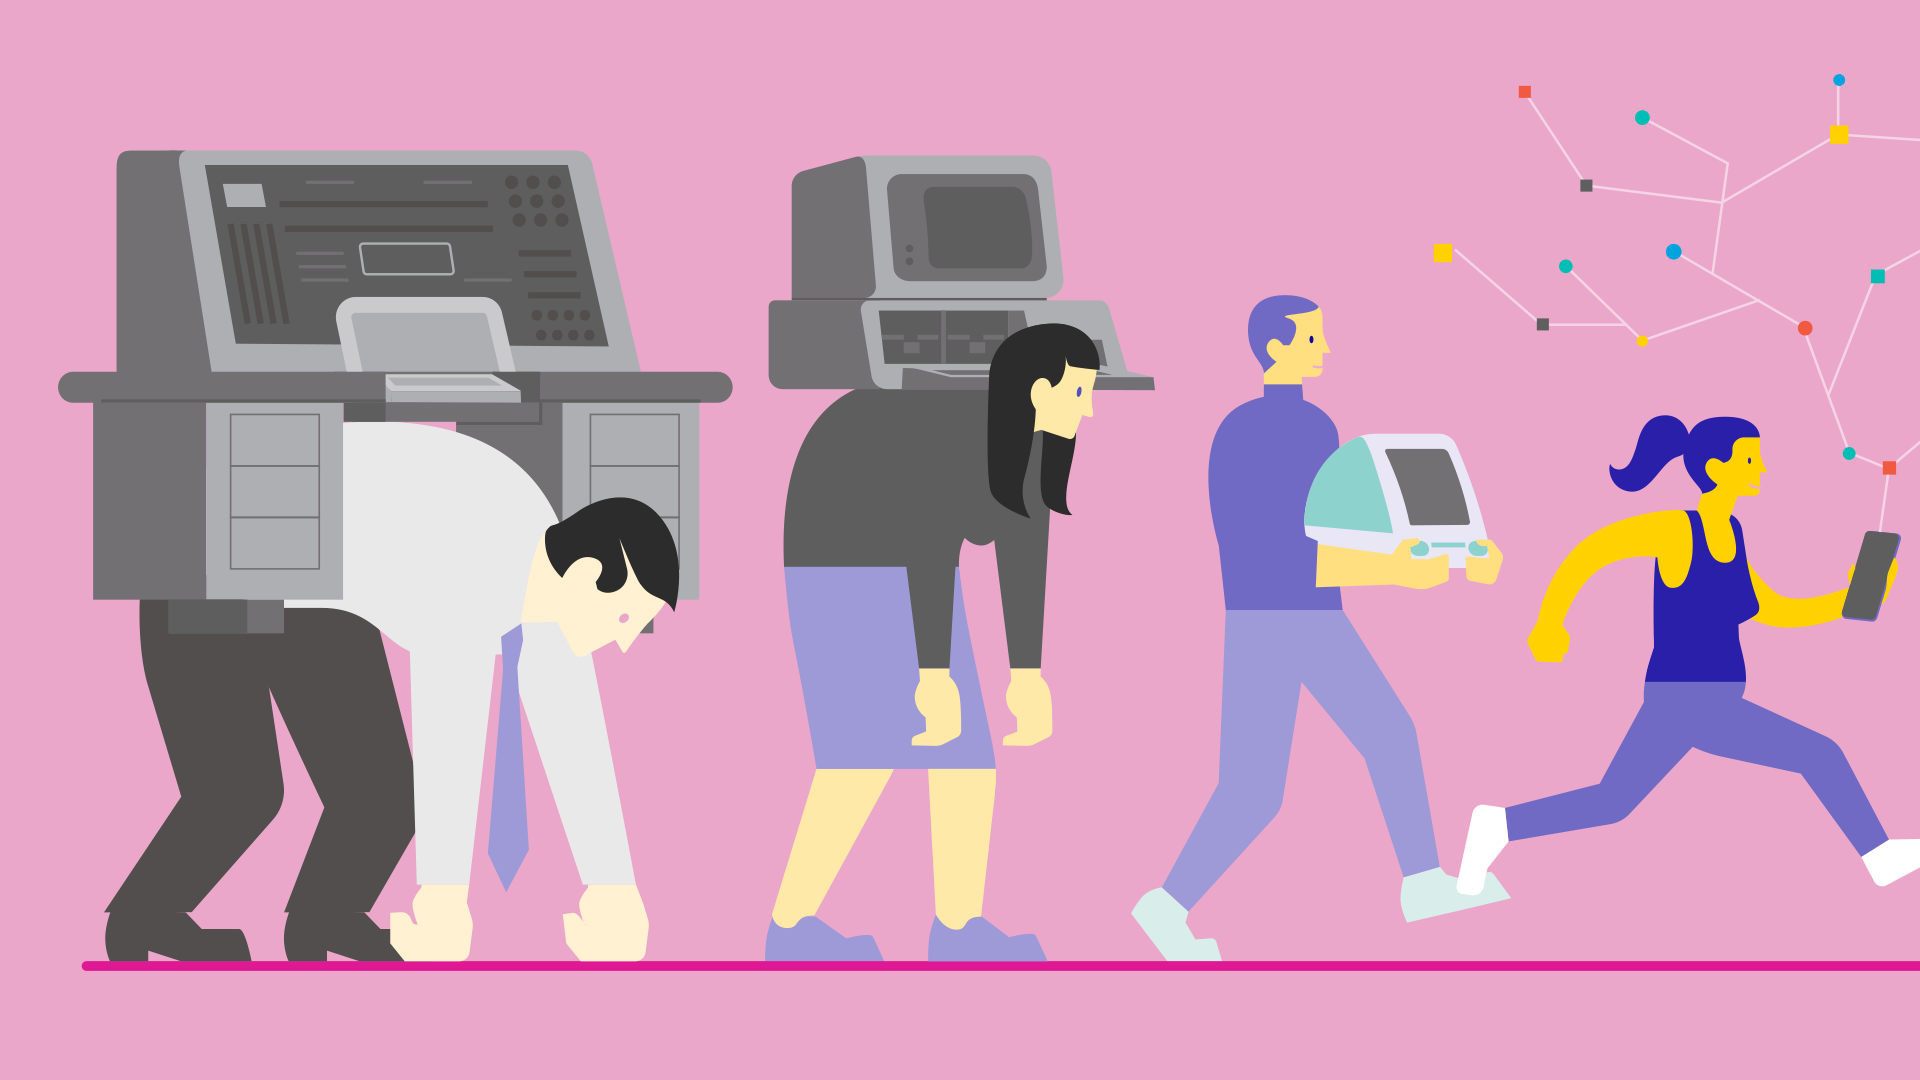 Ann illustration of four people, the first carrying a huge computer and progressing to smaller and smaller devices along the line